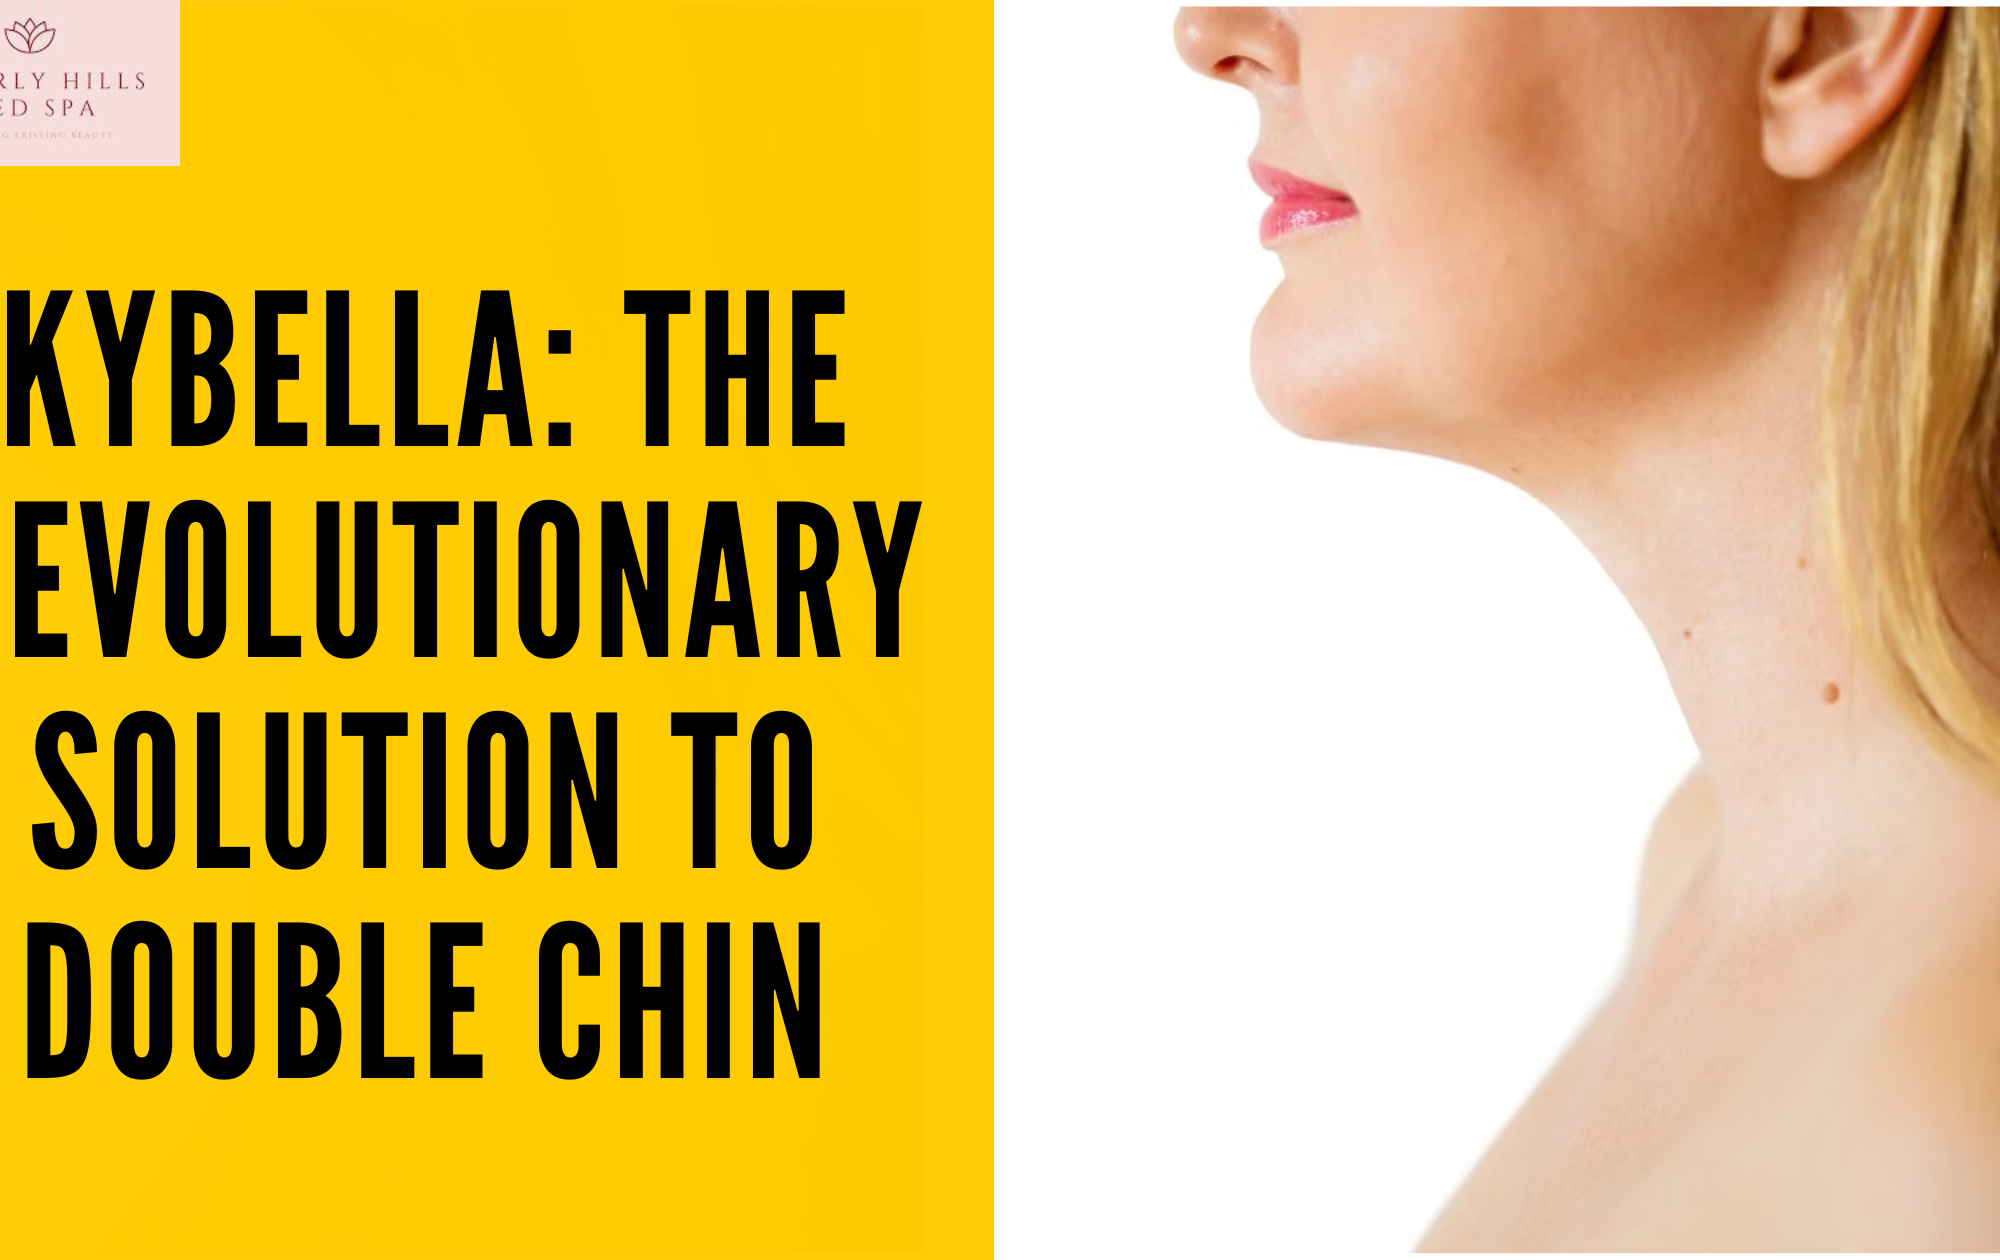 Kybella: The Revolutionary Solution to Double Chin